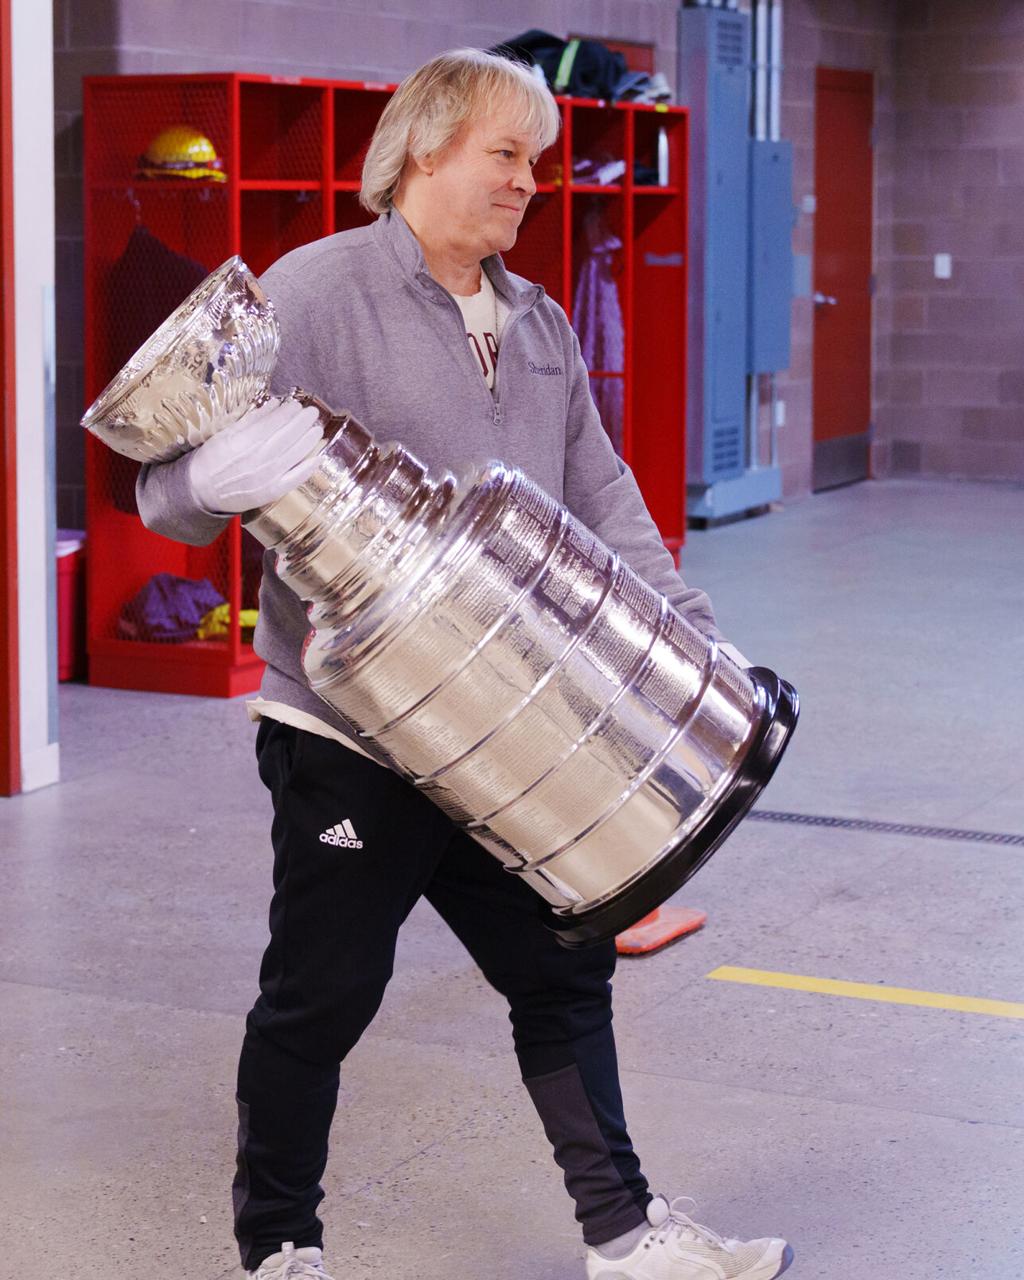 Stanley Cup comes to Fruita, Lifestyle